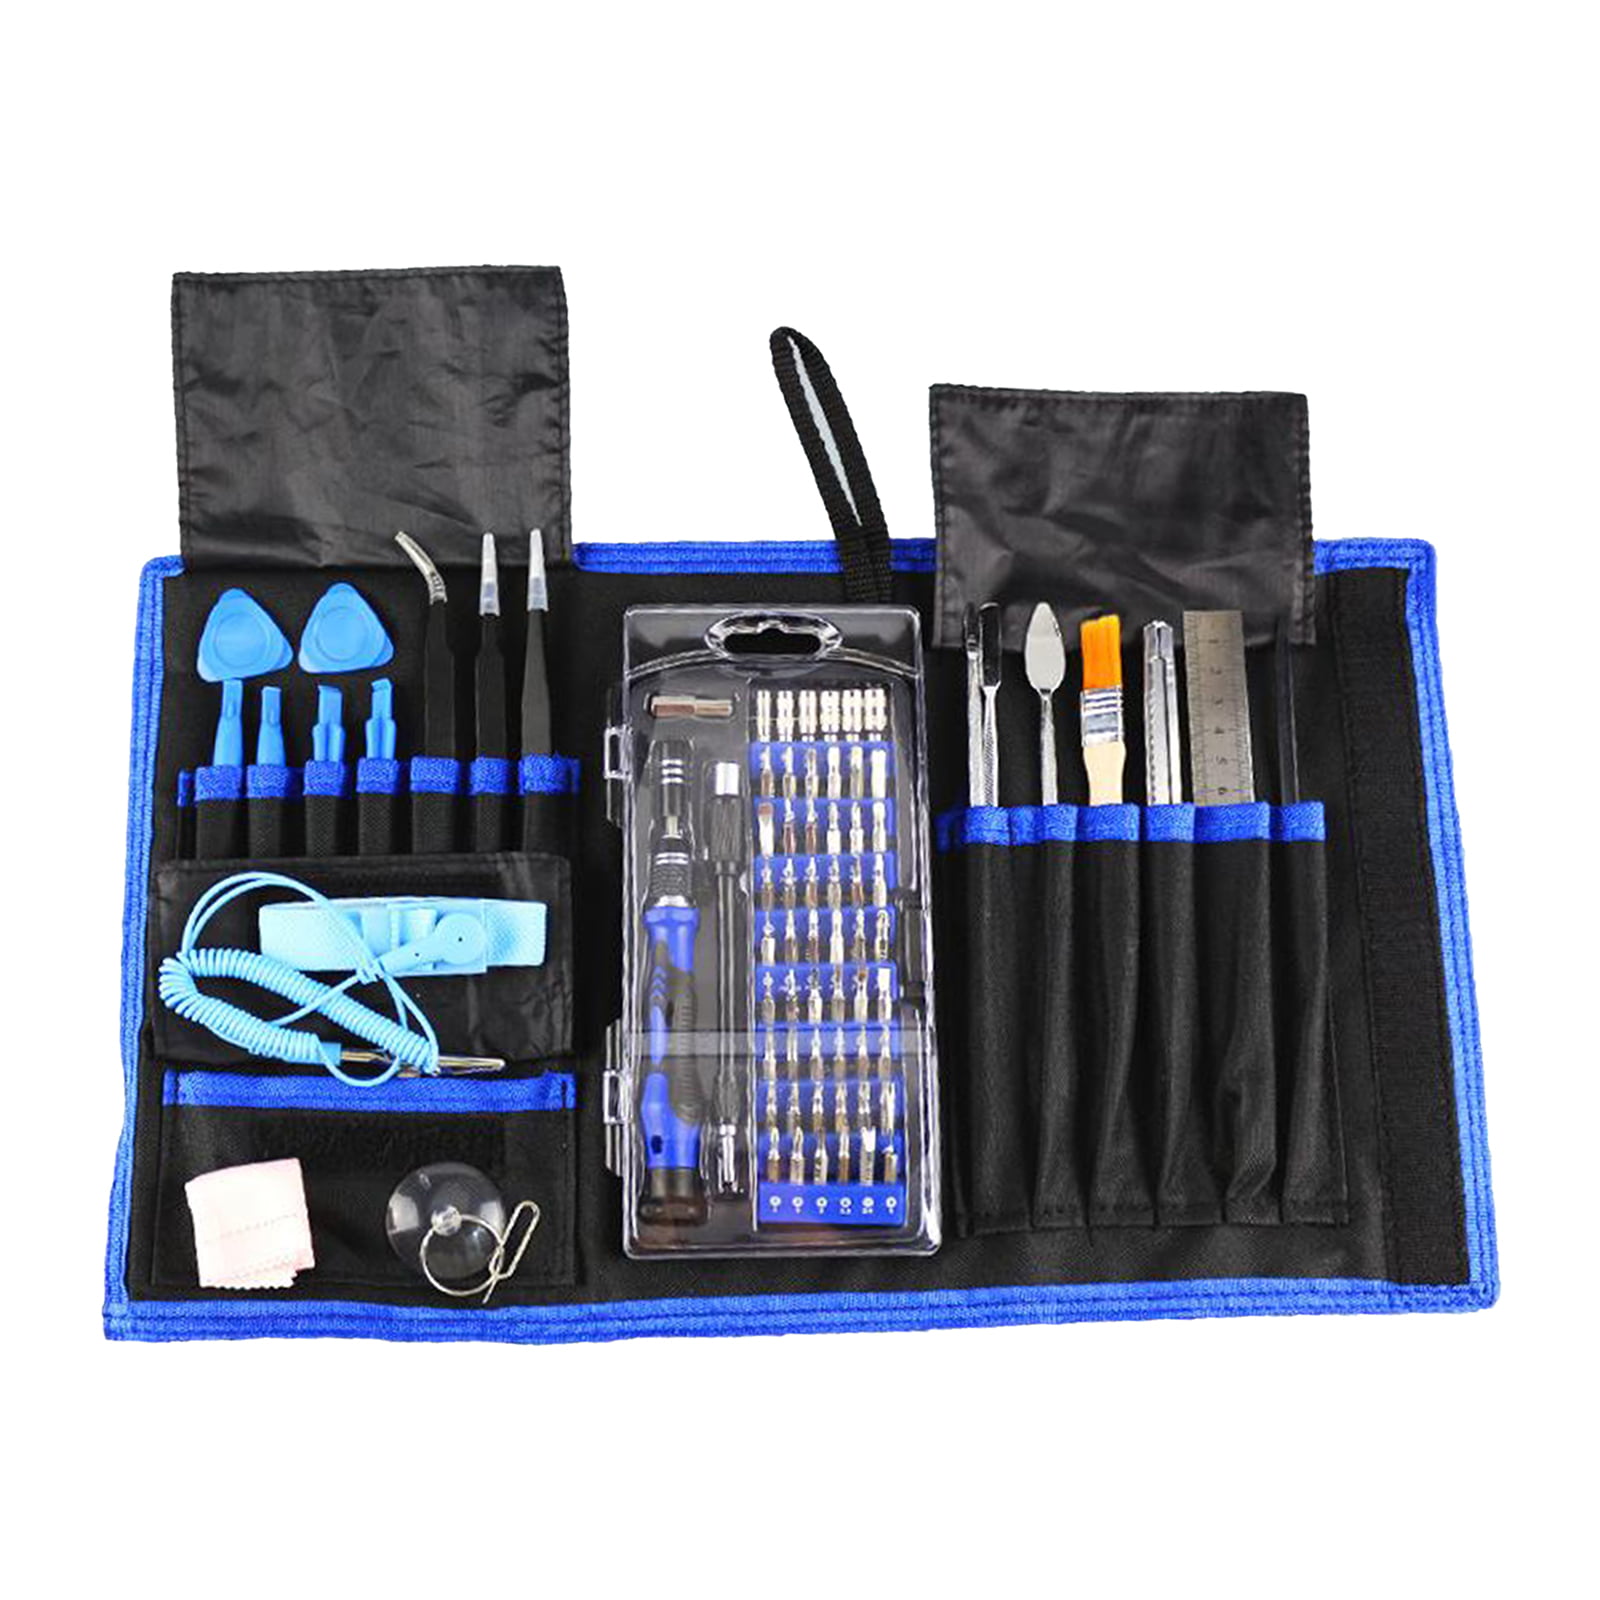 120 Small Bits and Accessories PS4 and other electronics Cleaning Precision Laptop Screwdriver Set with Case Suitable for iPhone MacBook 130 IN 1 Computer and Mobile Device Repair Tool Kit PC